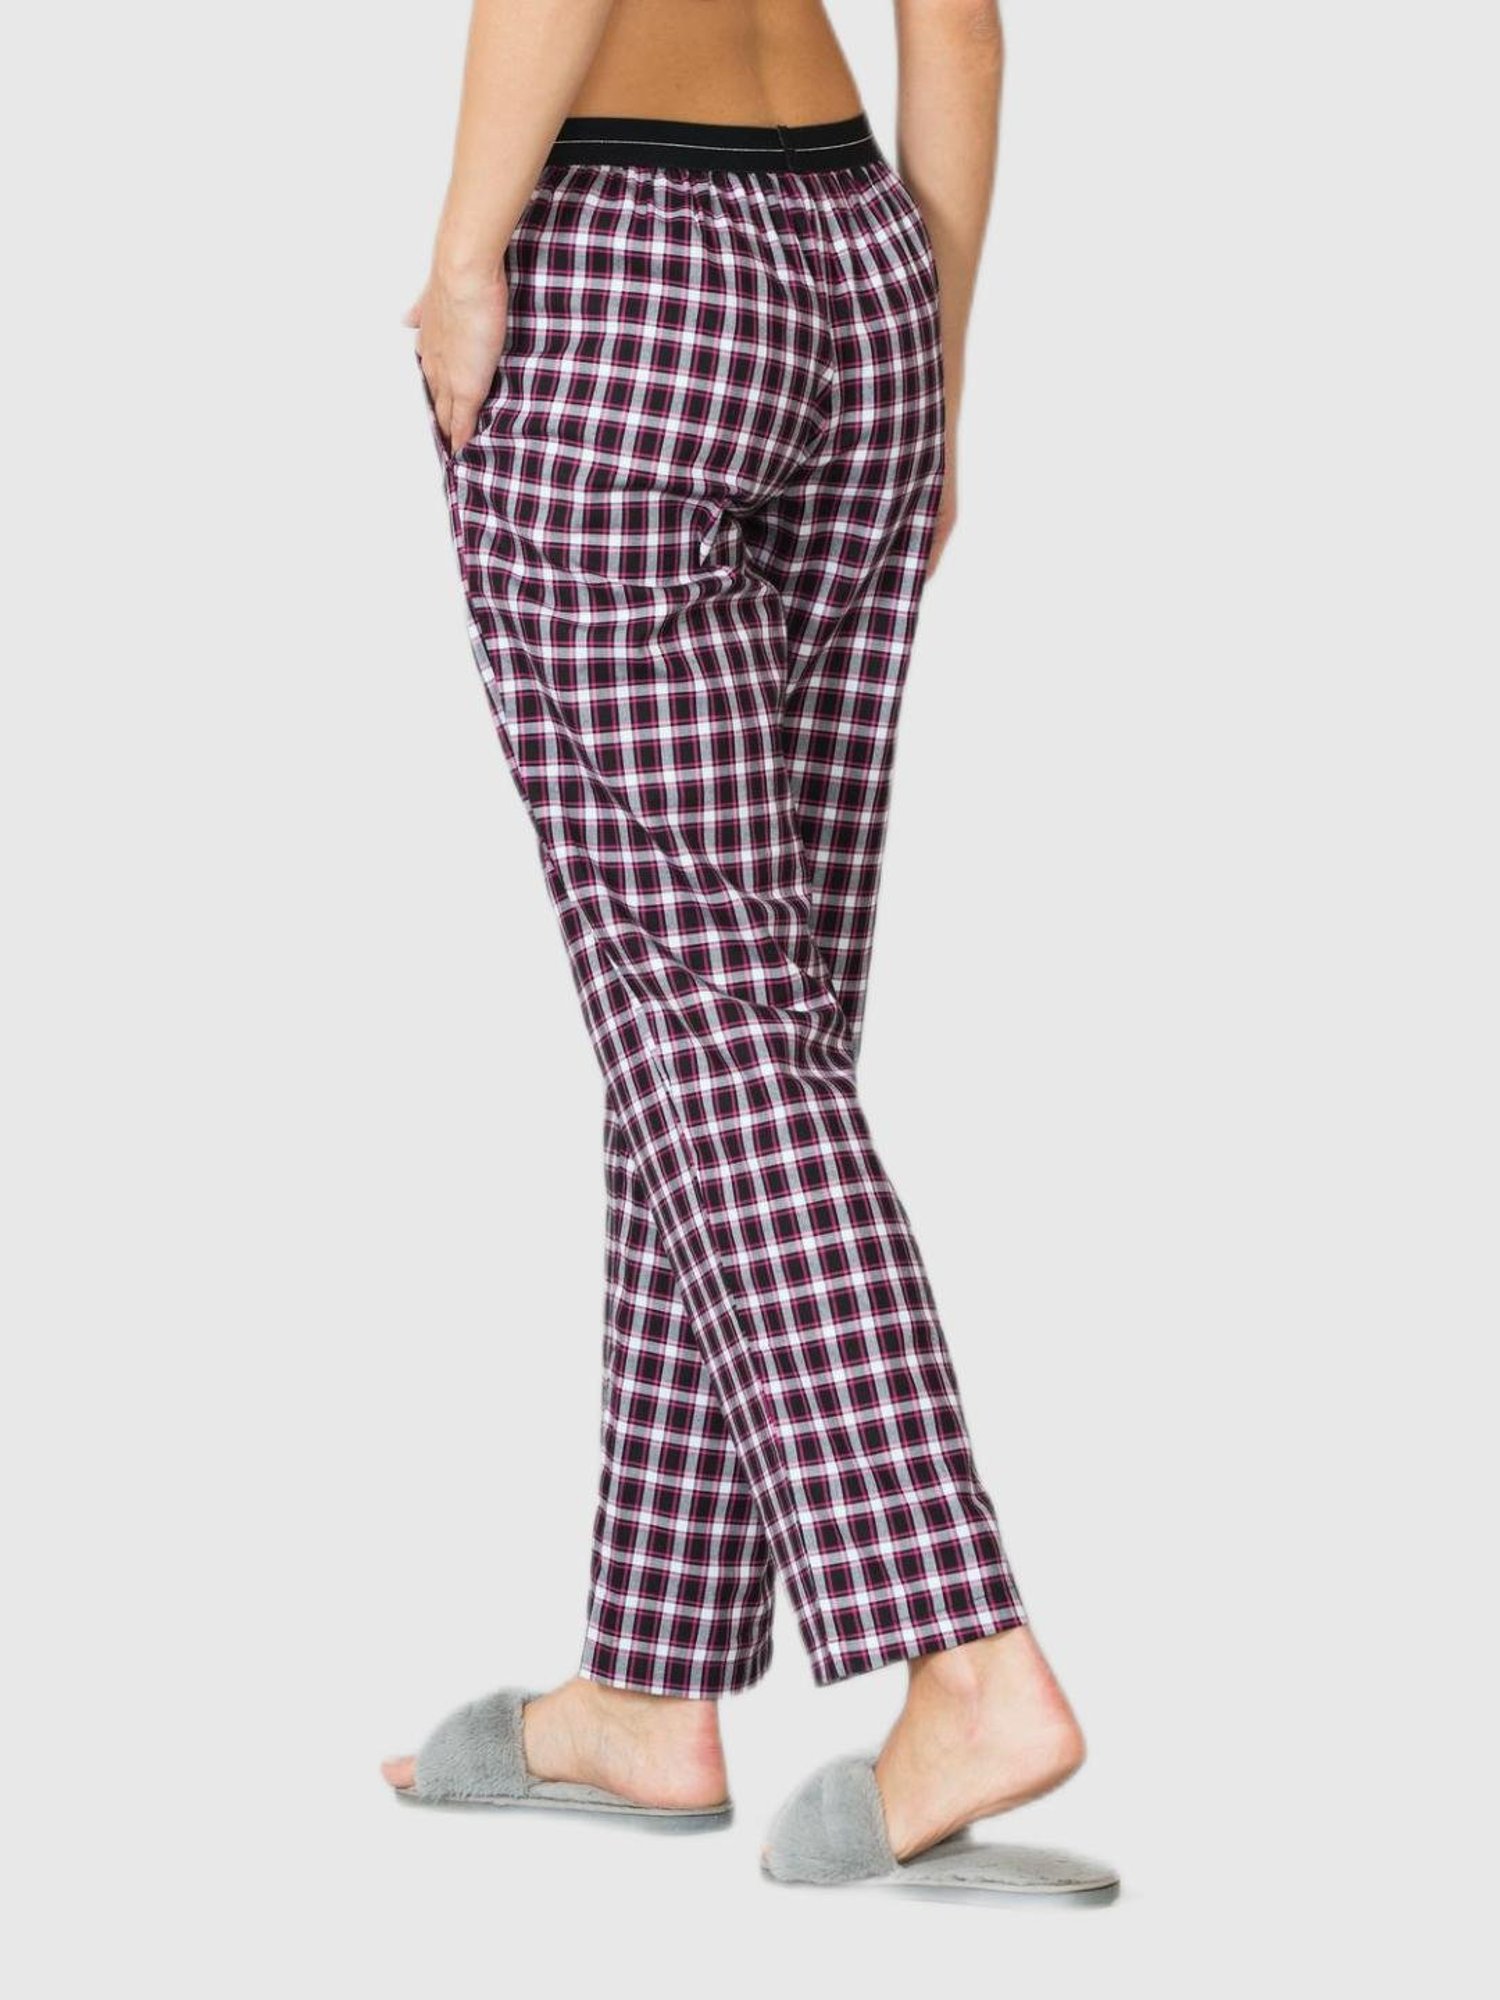 Buy White Purple Checks Belt Pant Cotton Pants for Best Price, Reviews,  Free Shipping